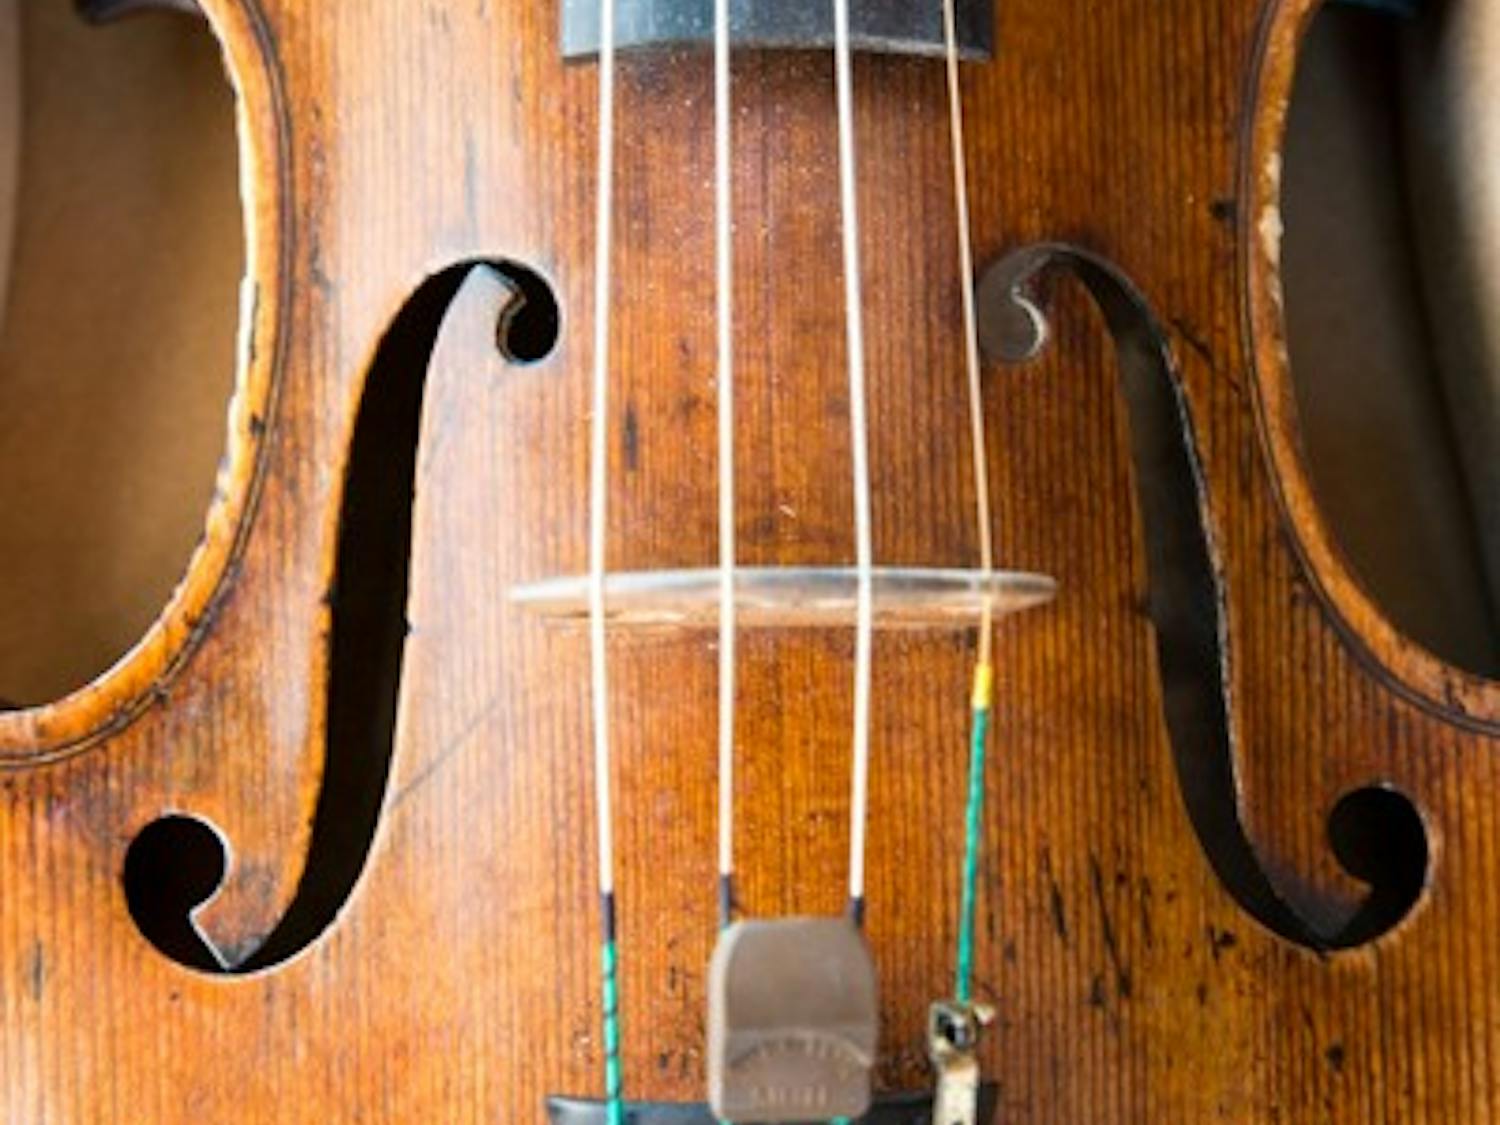 The violin that violin performance sophomore Xiangyuan Huang will perform with at Carnegie Hall sits in its case. The violin was made by Josephus Baldantonus and is rented by ASU to students on a semester-long basis. (Photo by Andrew Ybanez)